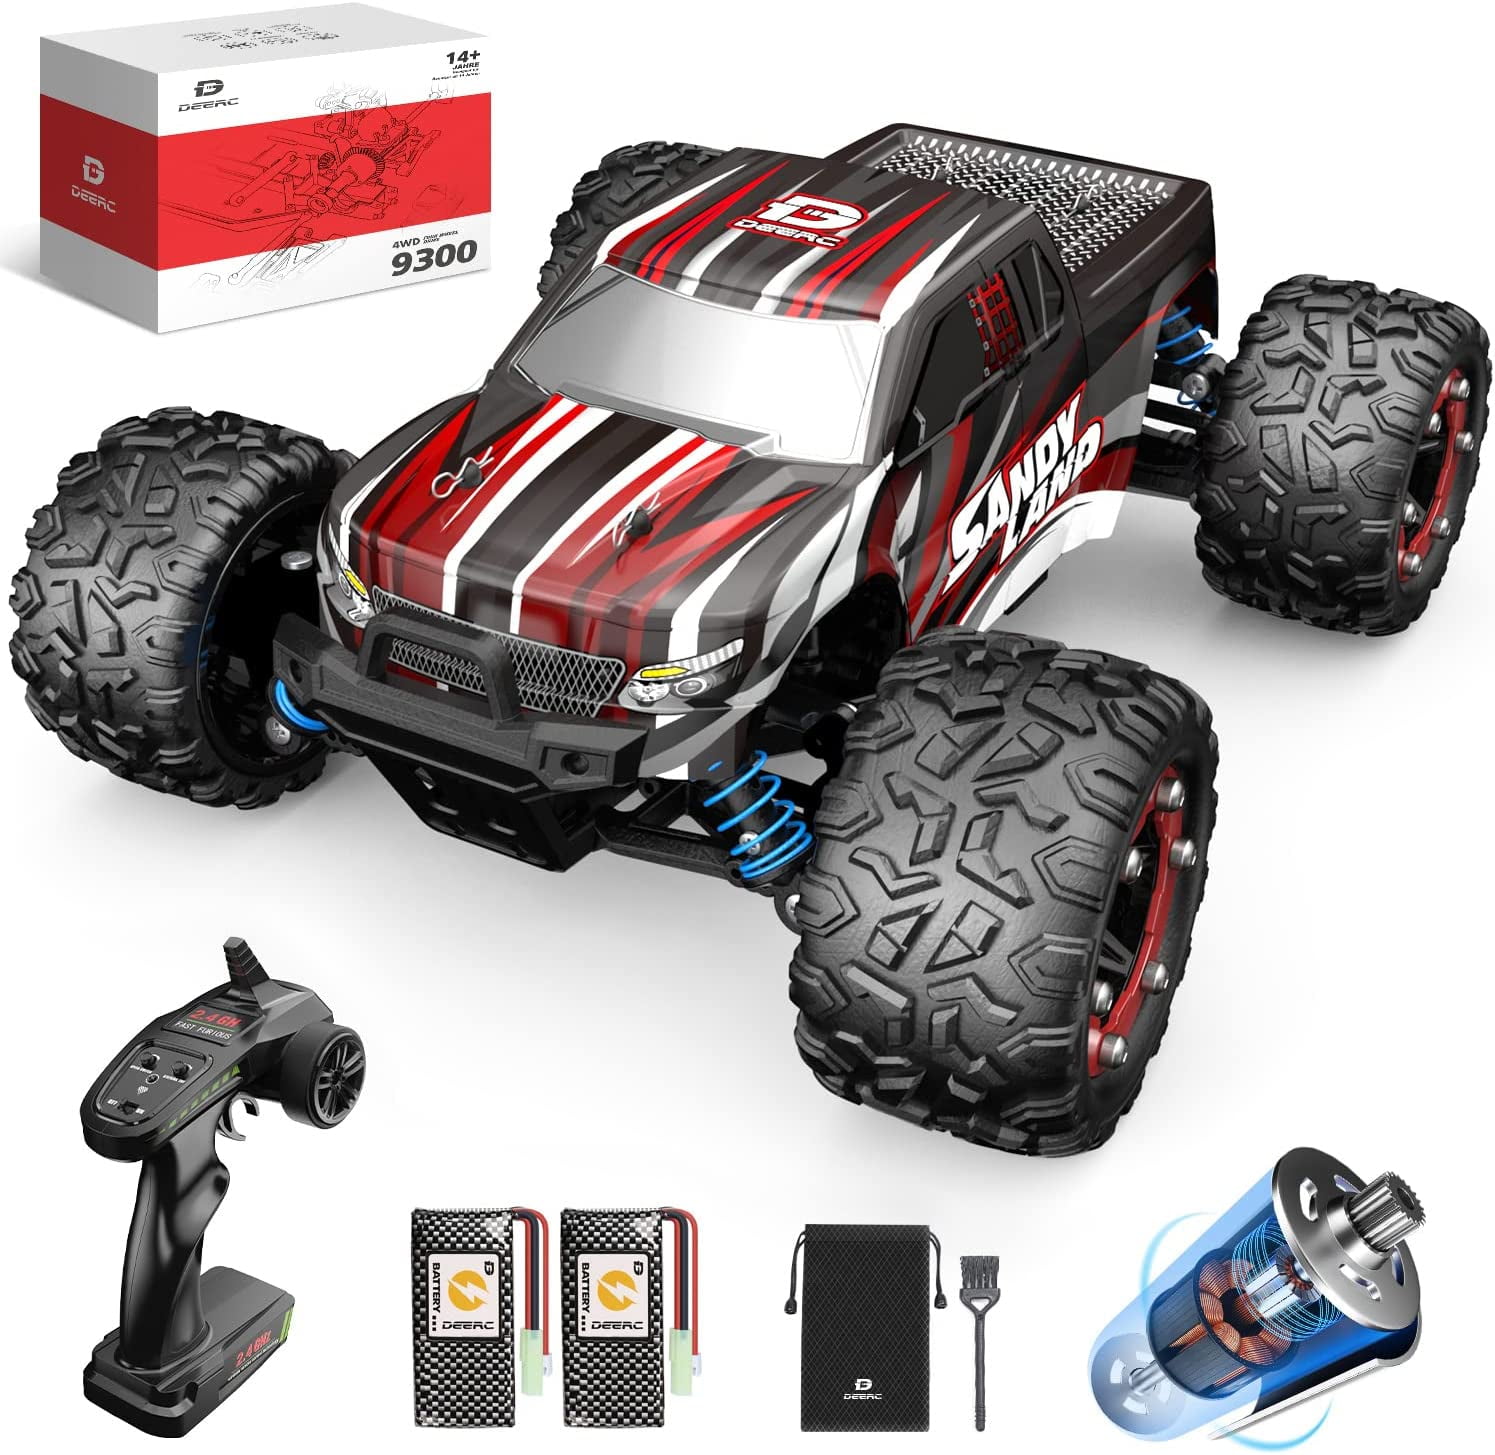 1/18 Scale Rc Trucks 4WD Off Road Racing Vehicle 2.4Ghz Radio Remote Control Car Rc Remote Control Cars High Speed Electric Vehicle for Kids Adults 